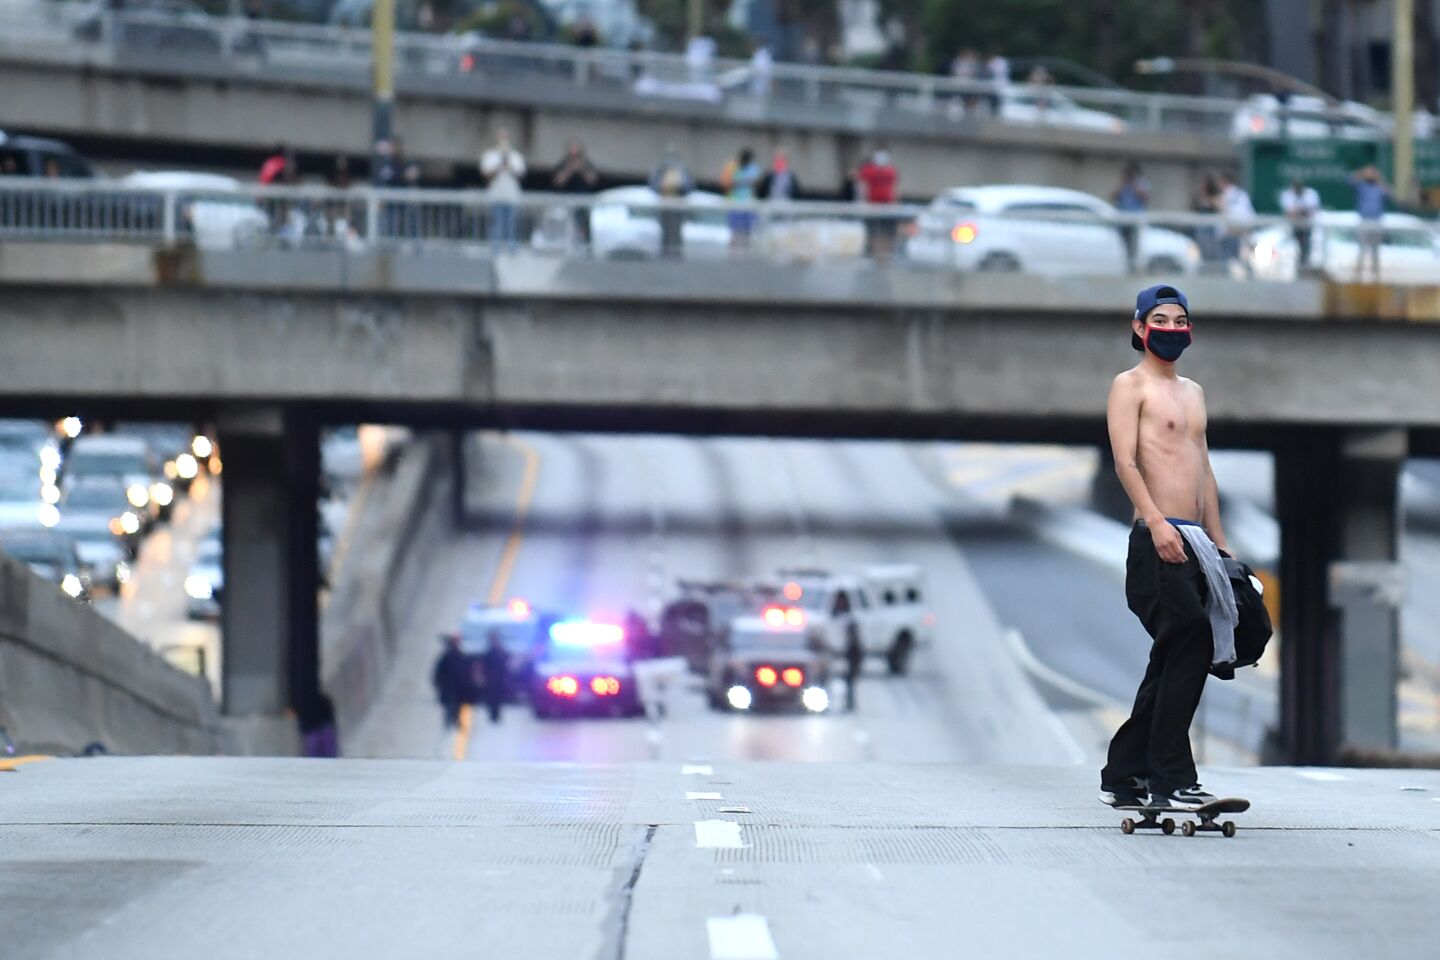 A protester rides a skateboard on the 110 Freeway.